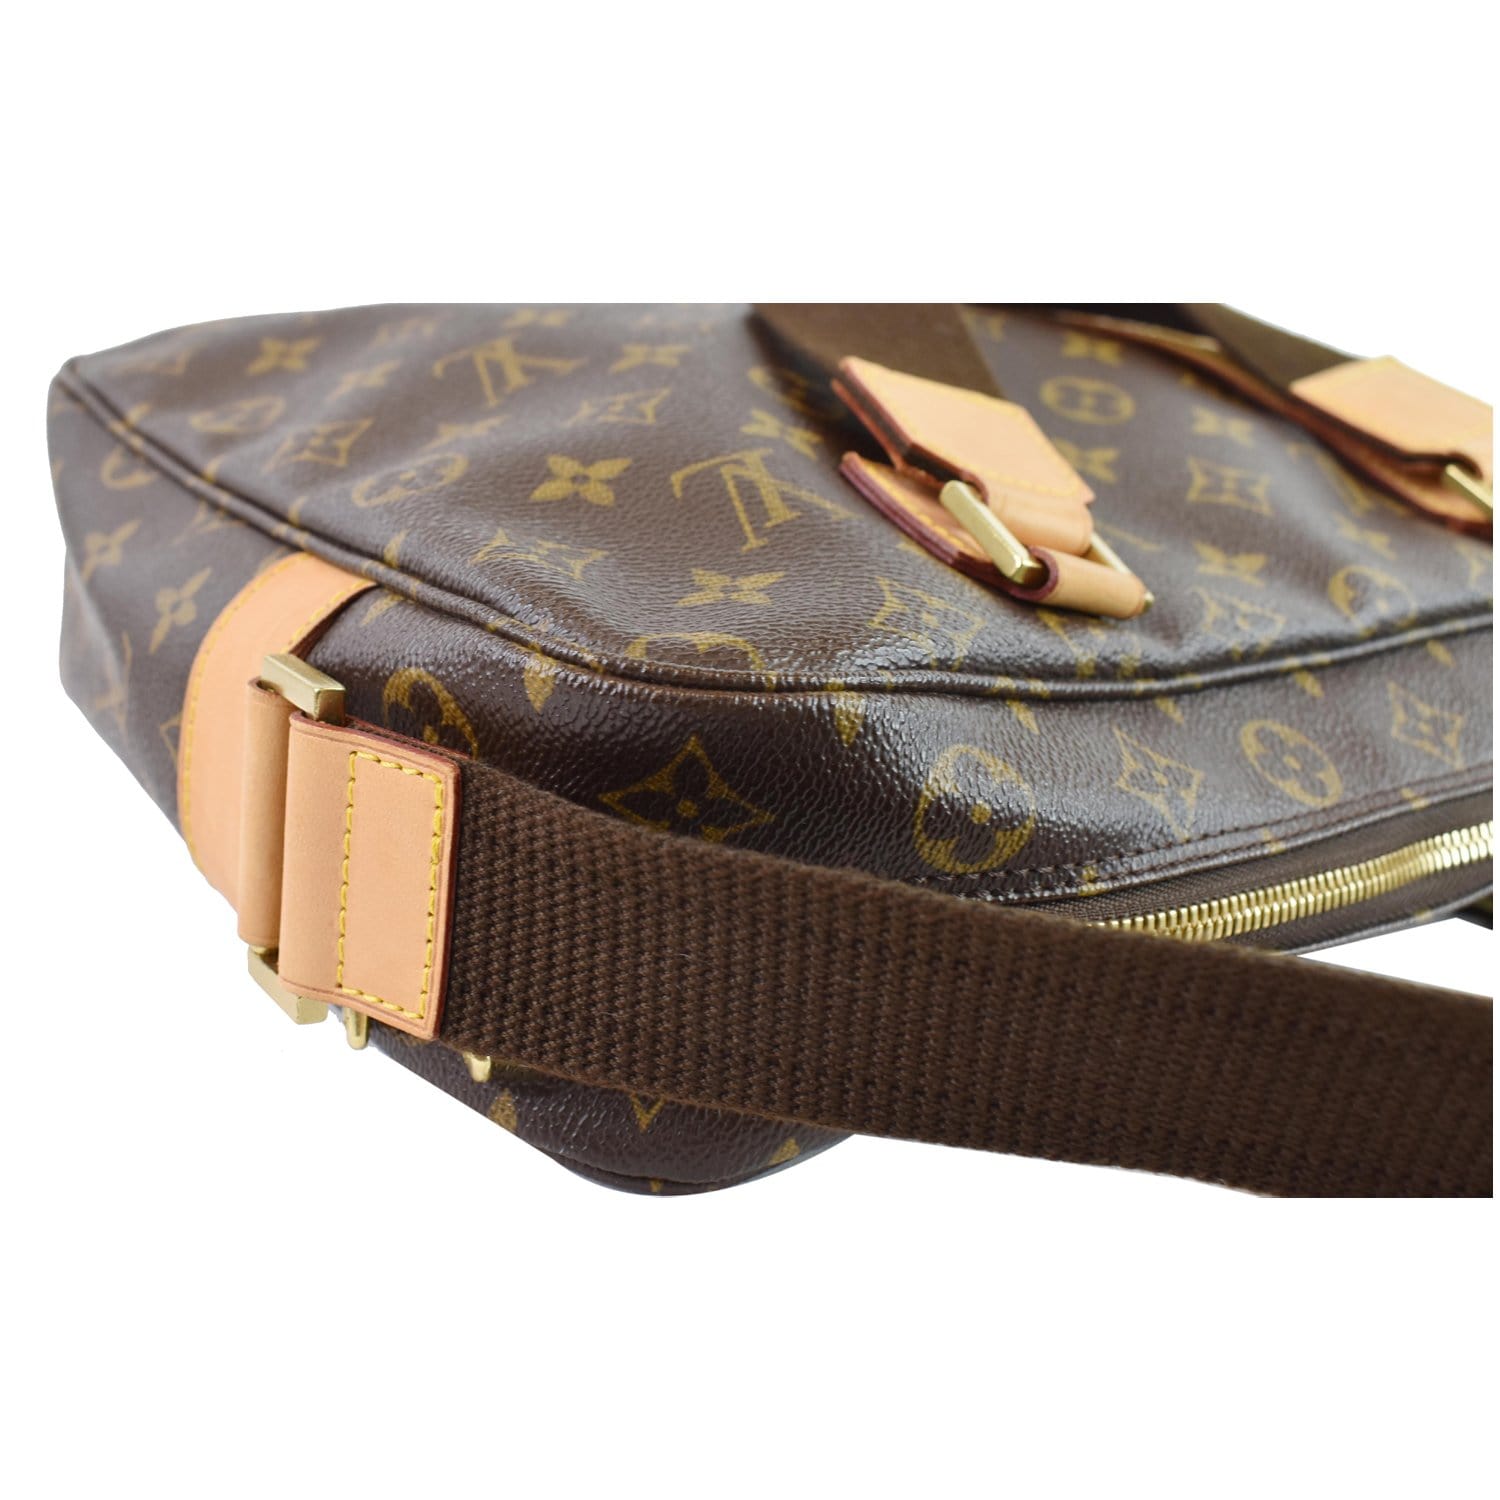 Louis Vuitton 'Monceau' Messenger bag reference guide - Spotted